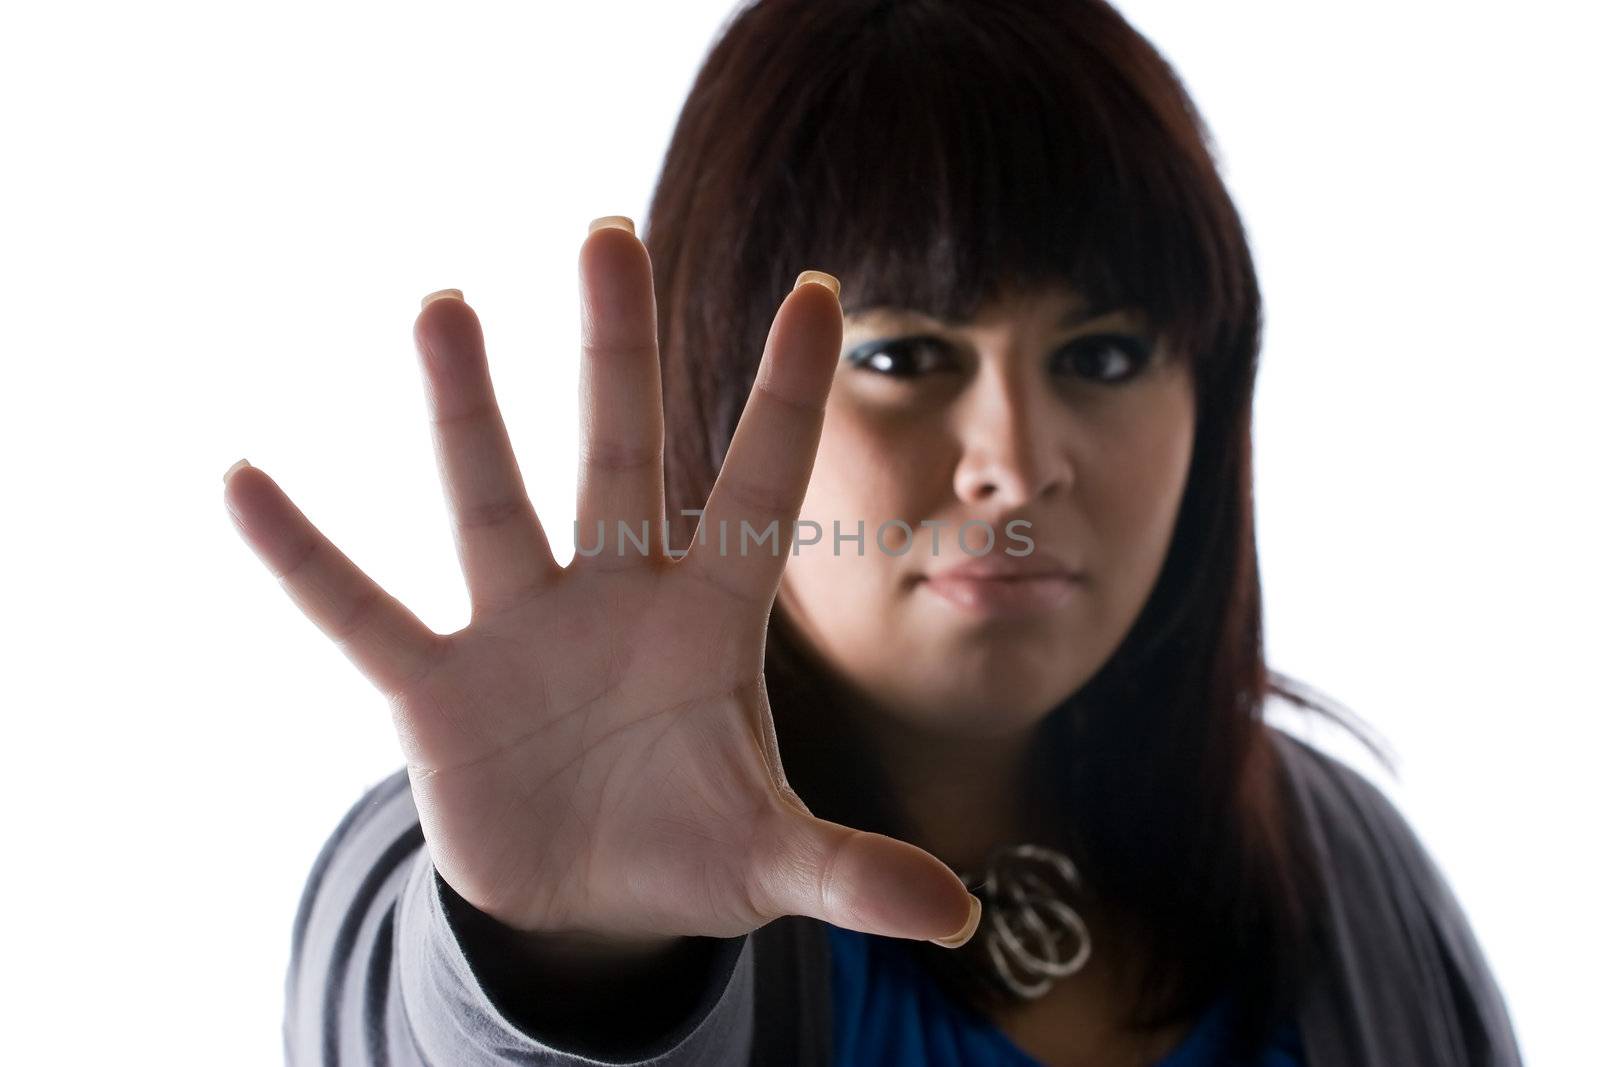 A woman holds up the palm of her hand in a defensive manner.  Shallow depth of field.